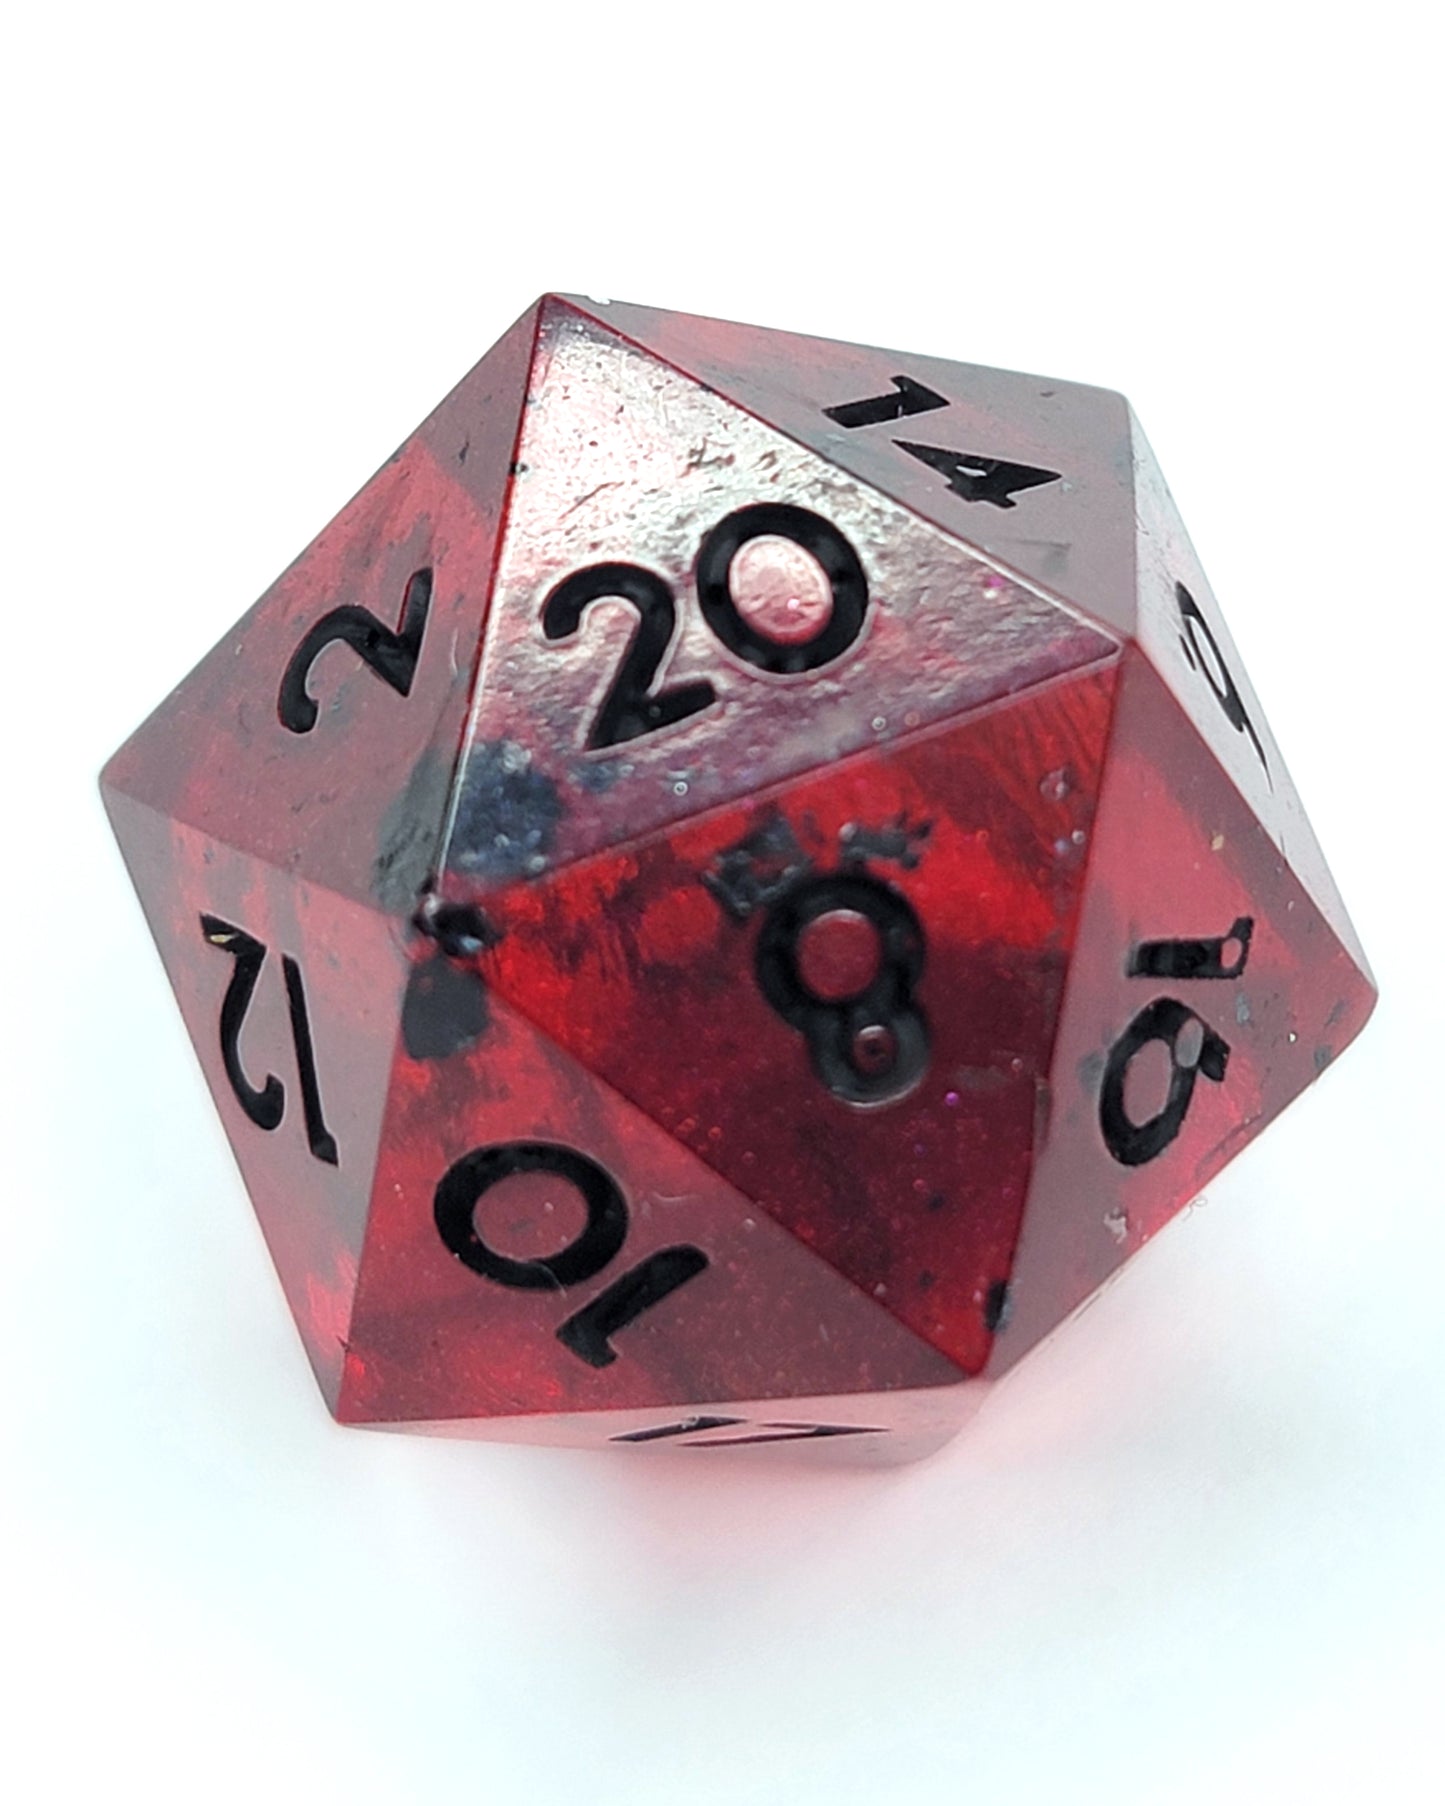 Infernal -1 D20 | Handmade Dice | Hand Crafted Dungeons and Dragons Dice